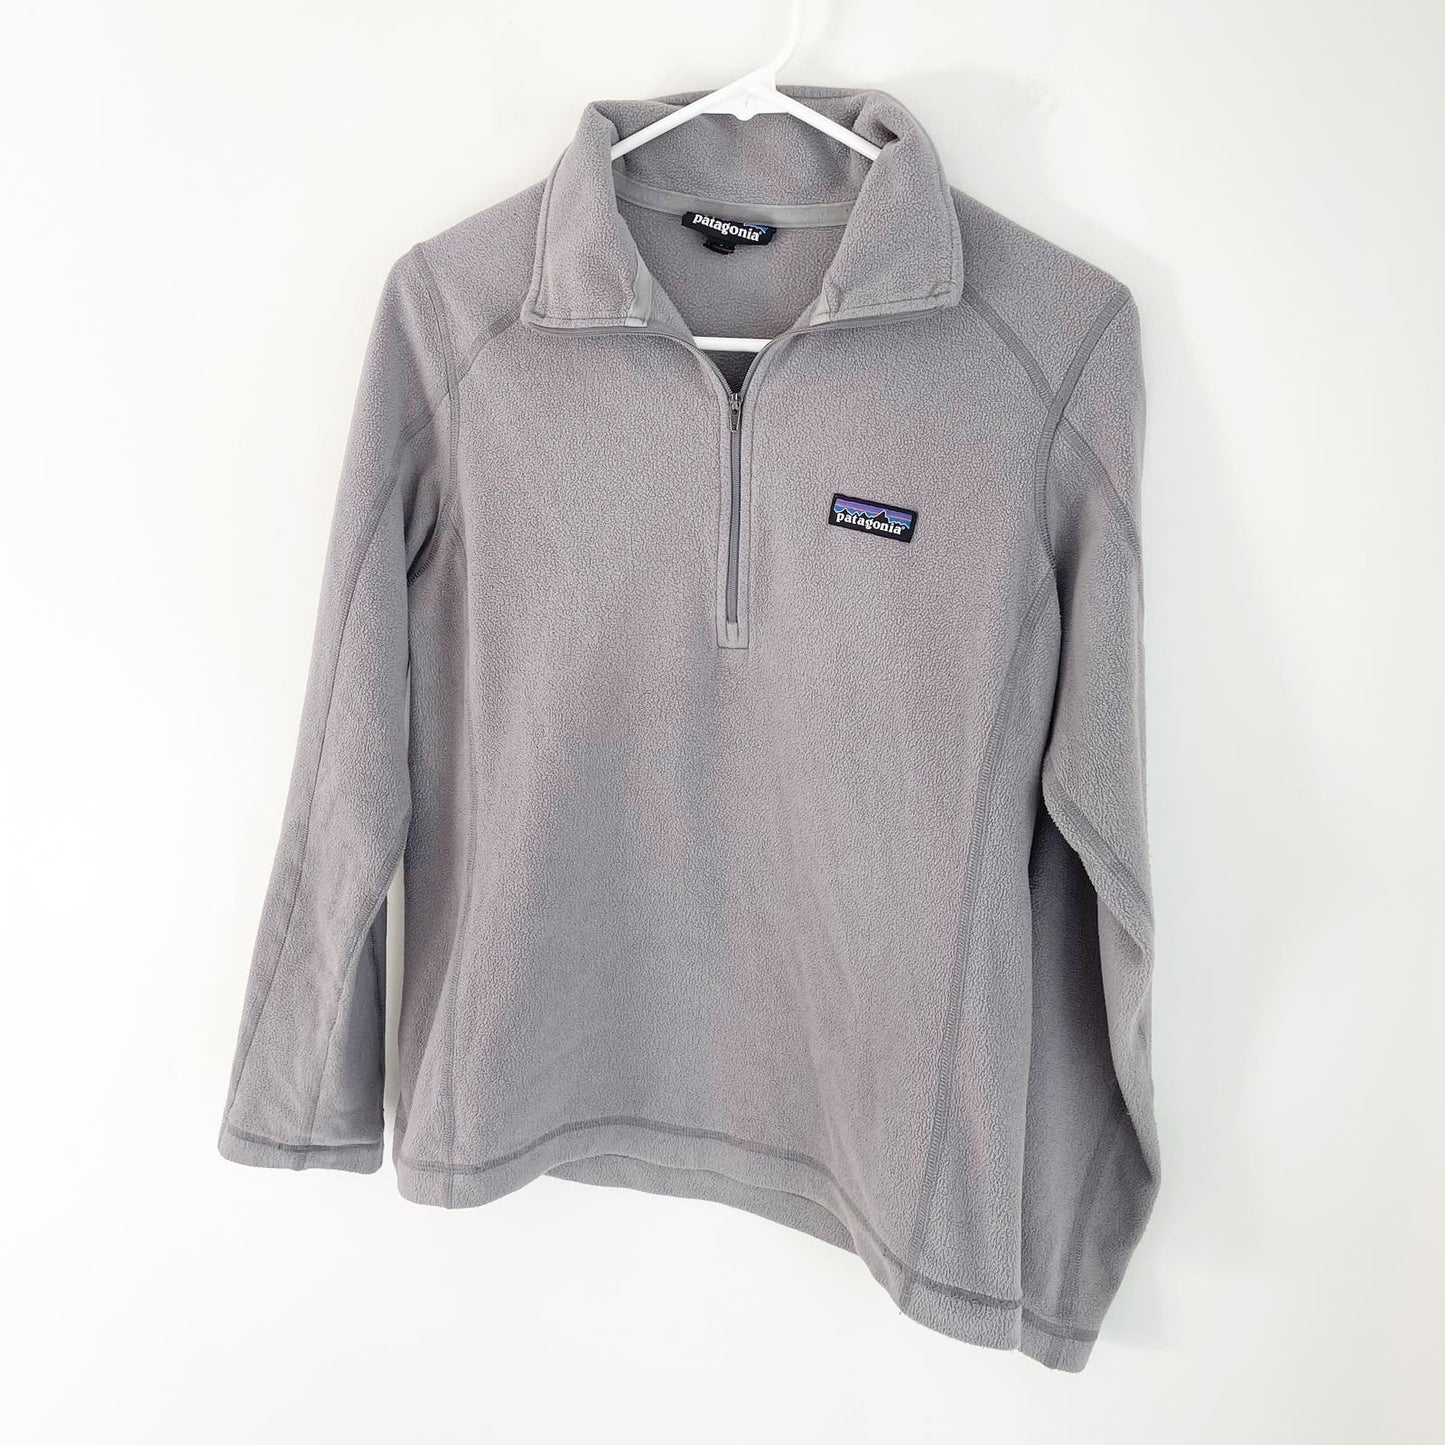 Patagonia Micro D 1/4 Zip Fleece Pullover Jacket Feather Gray Small